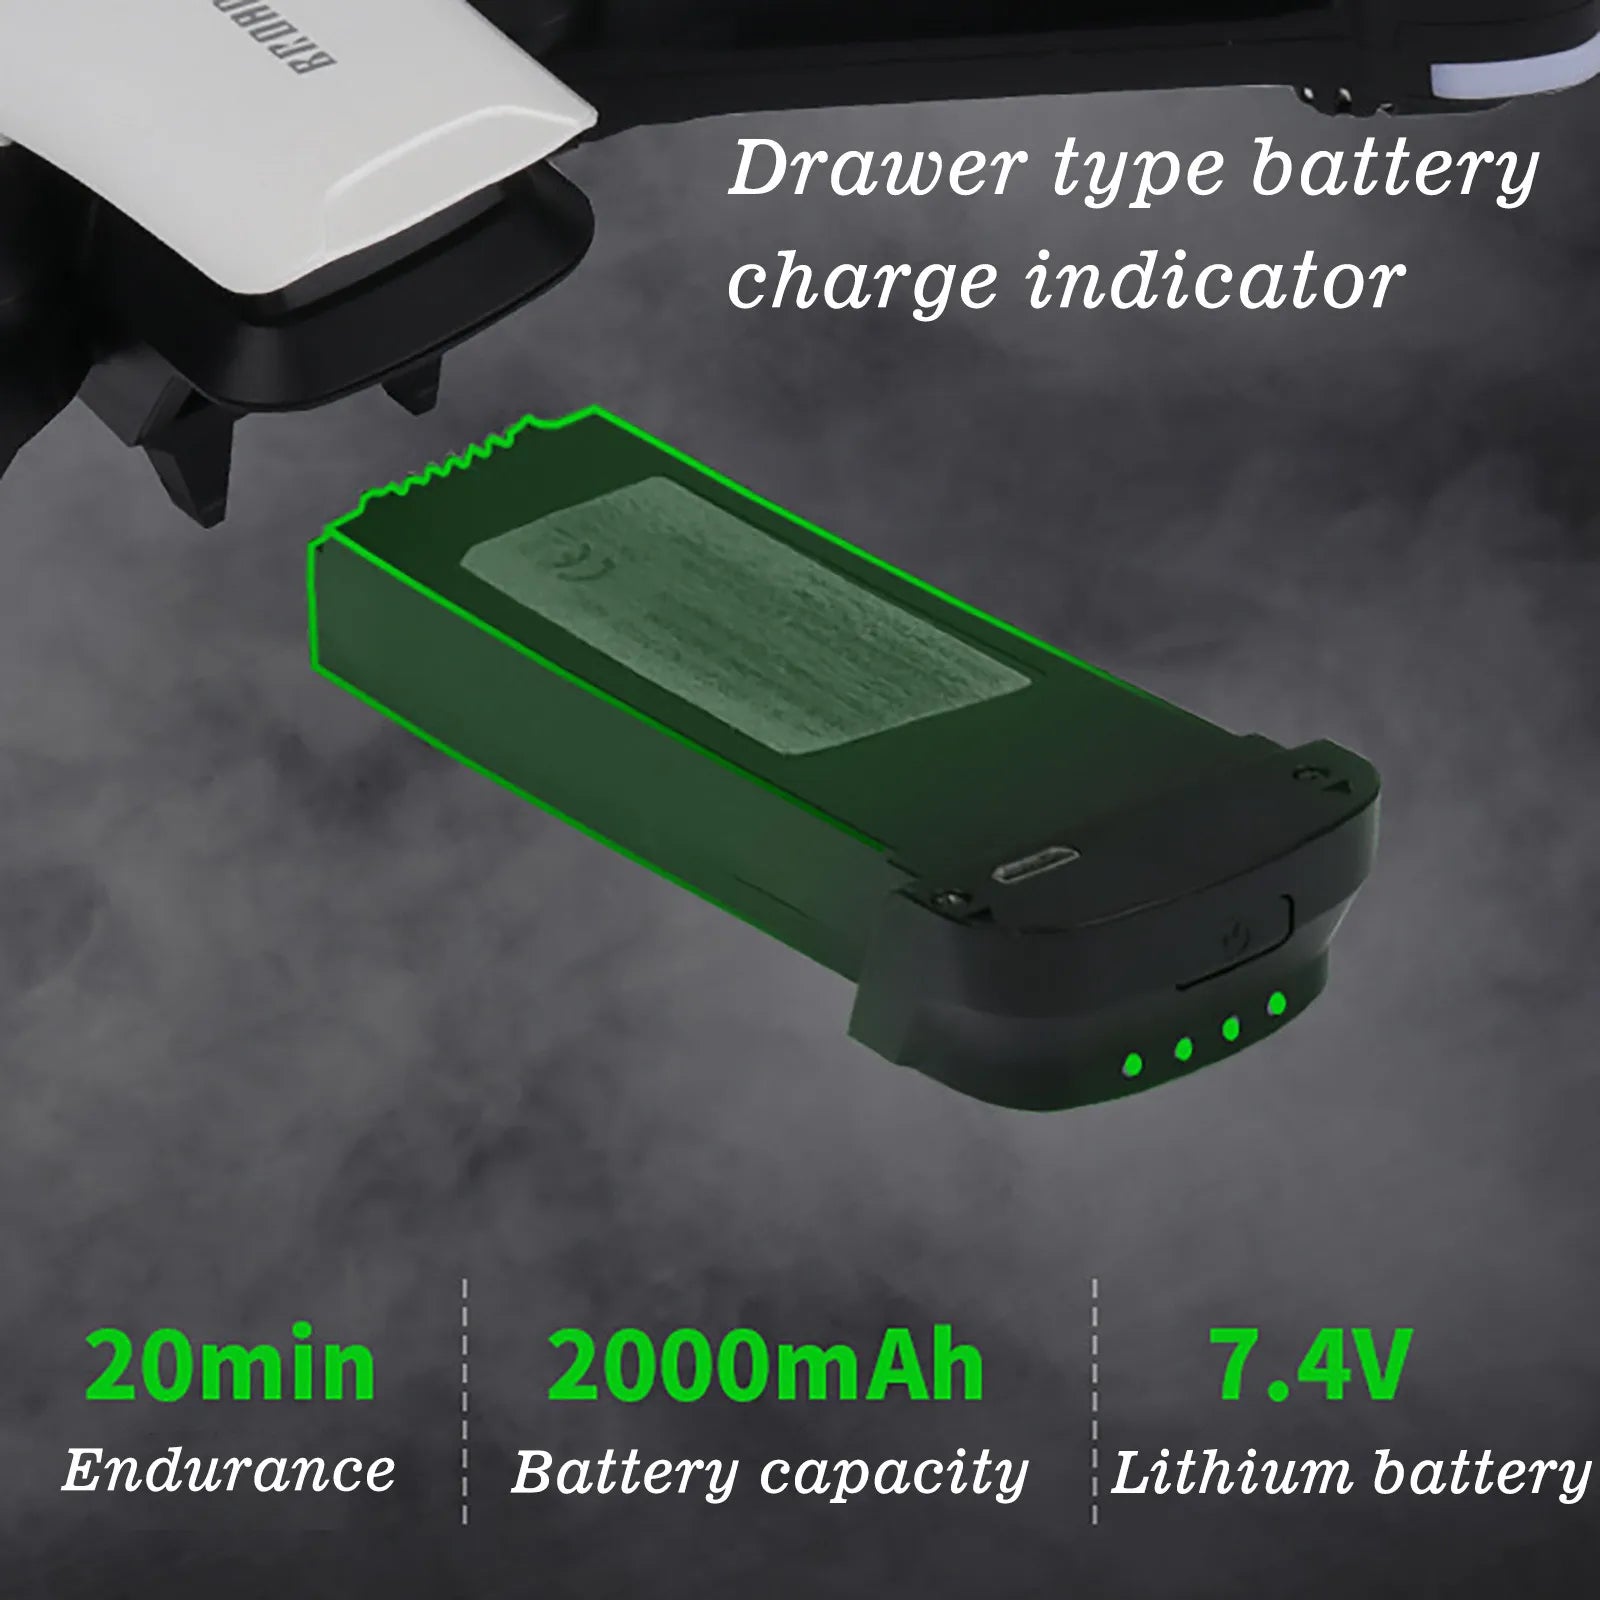 G05 Drone, Drawer type battery charge indicator 20min 2oomAh 7.4V Endurance Battery